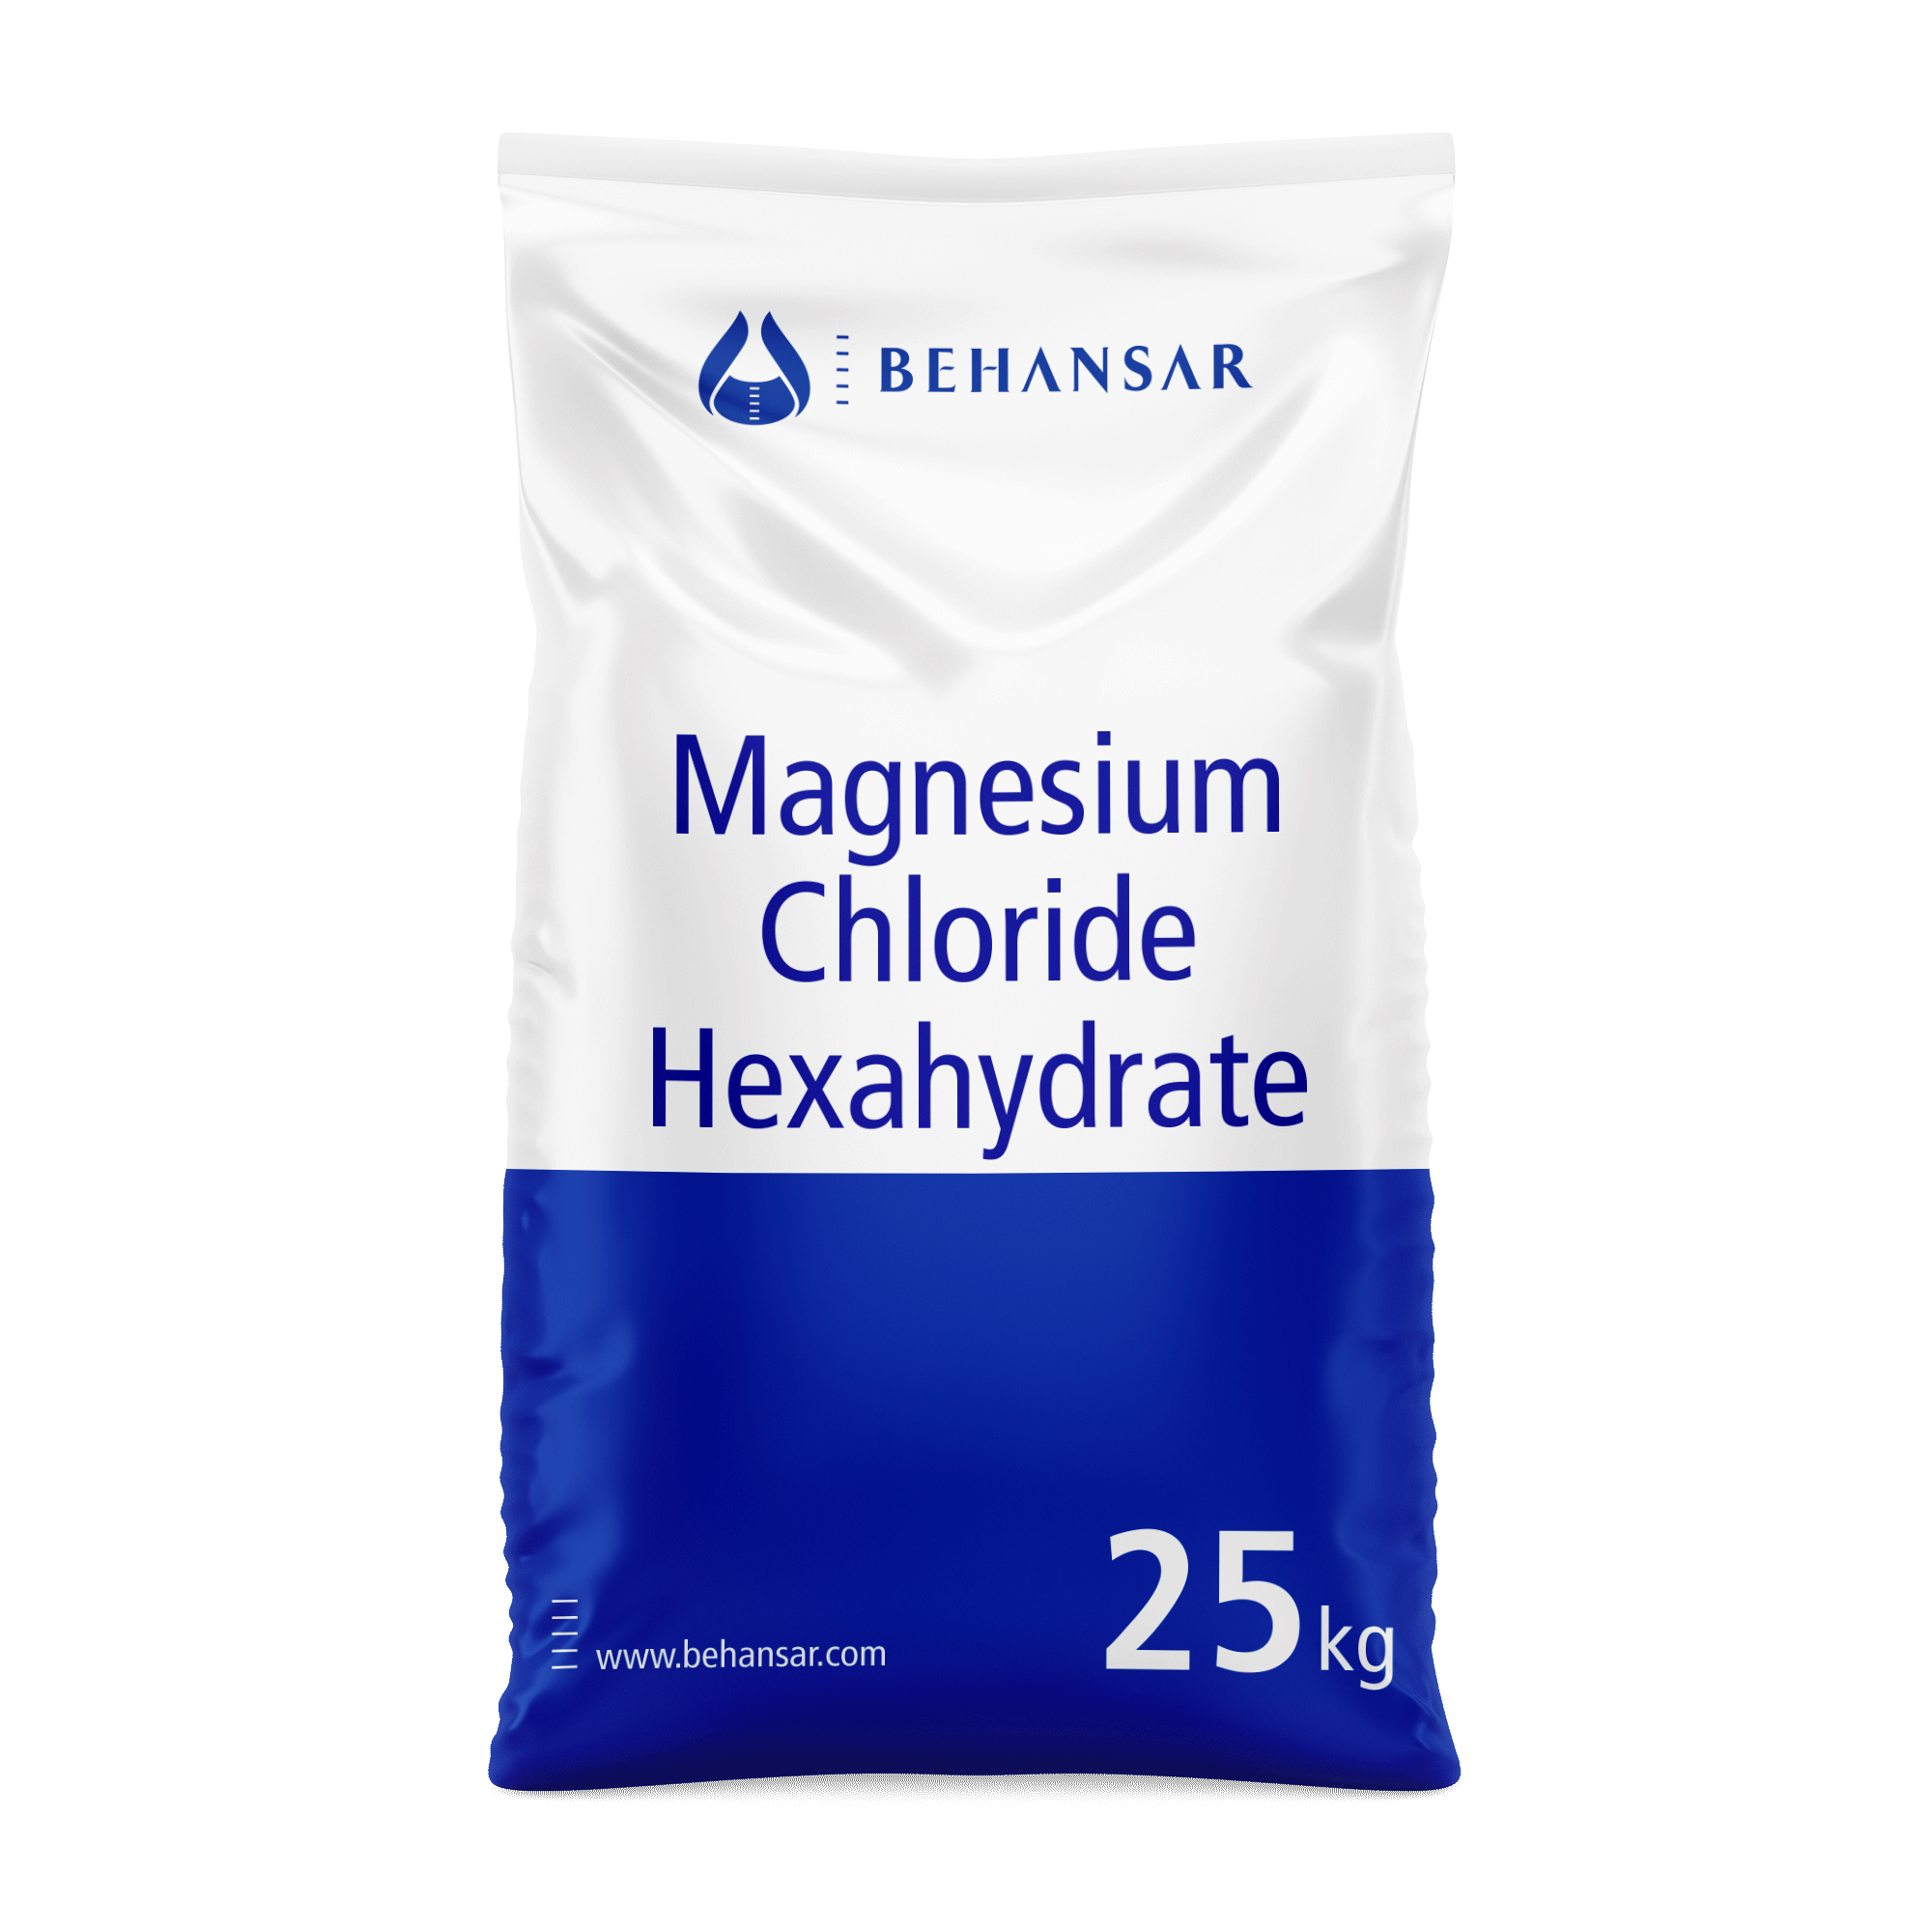 Magnesium Chloride Hexahydrate is one of the products of Behansar Co